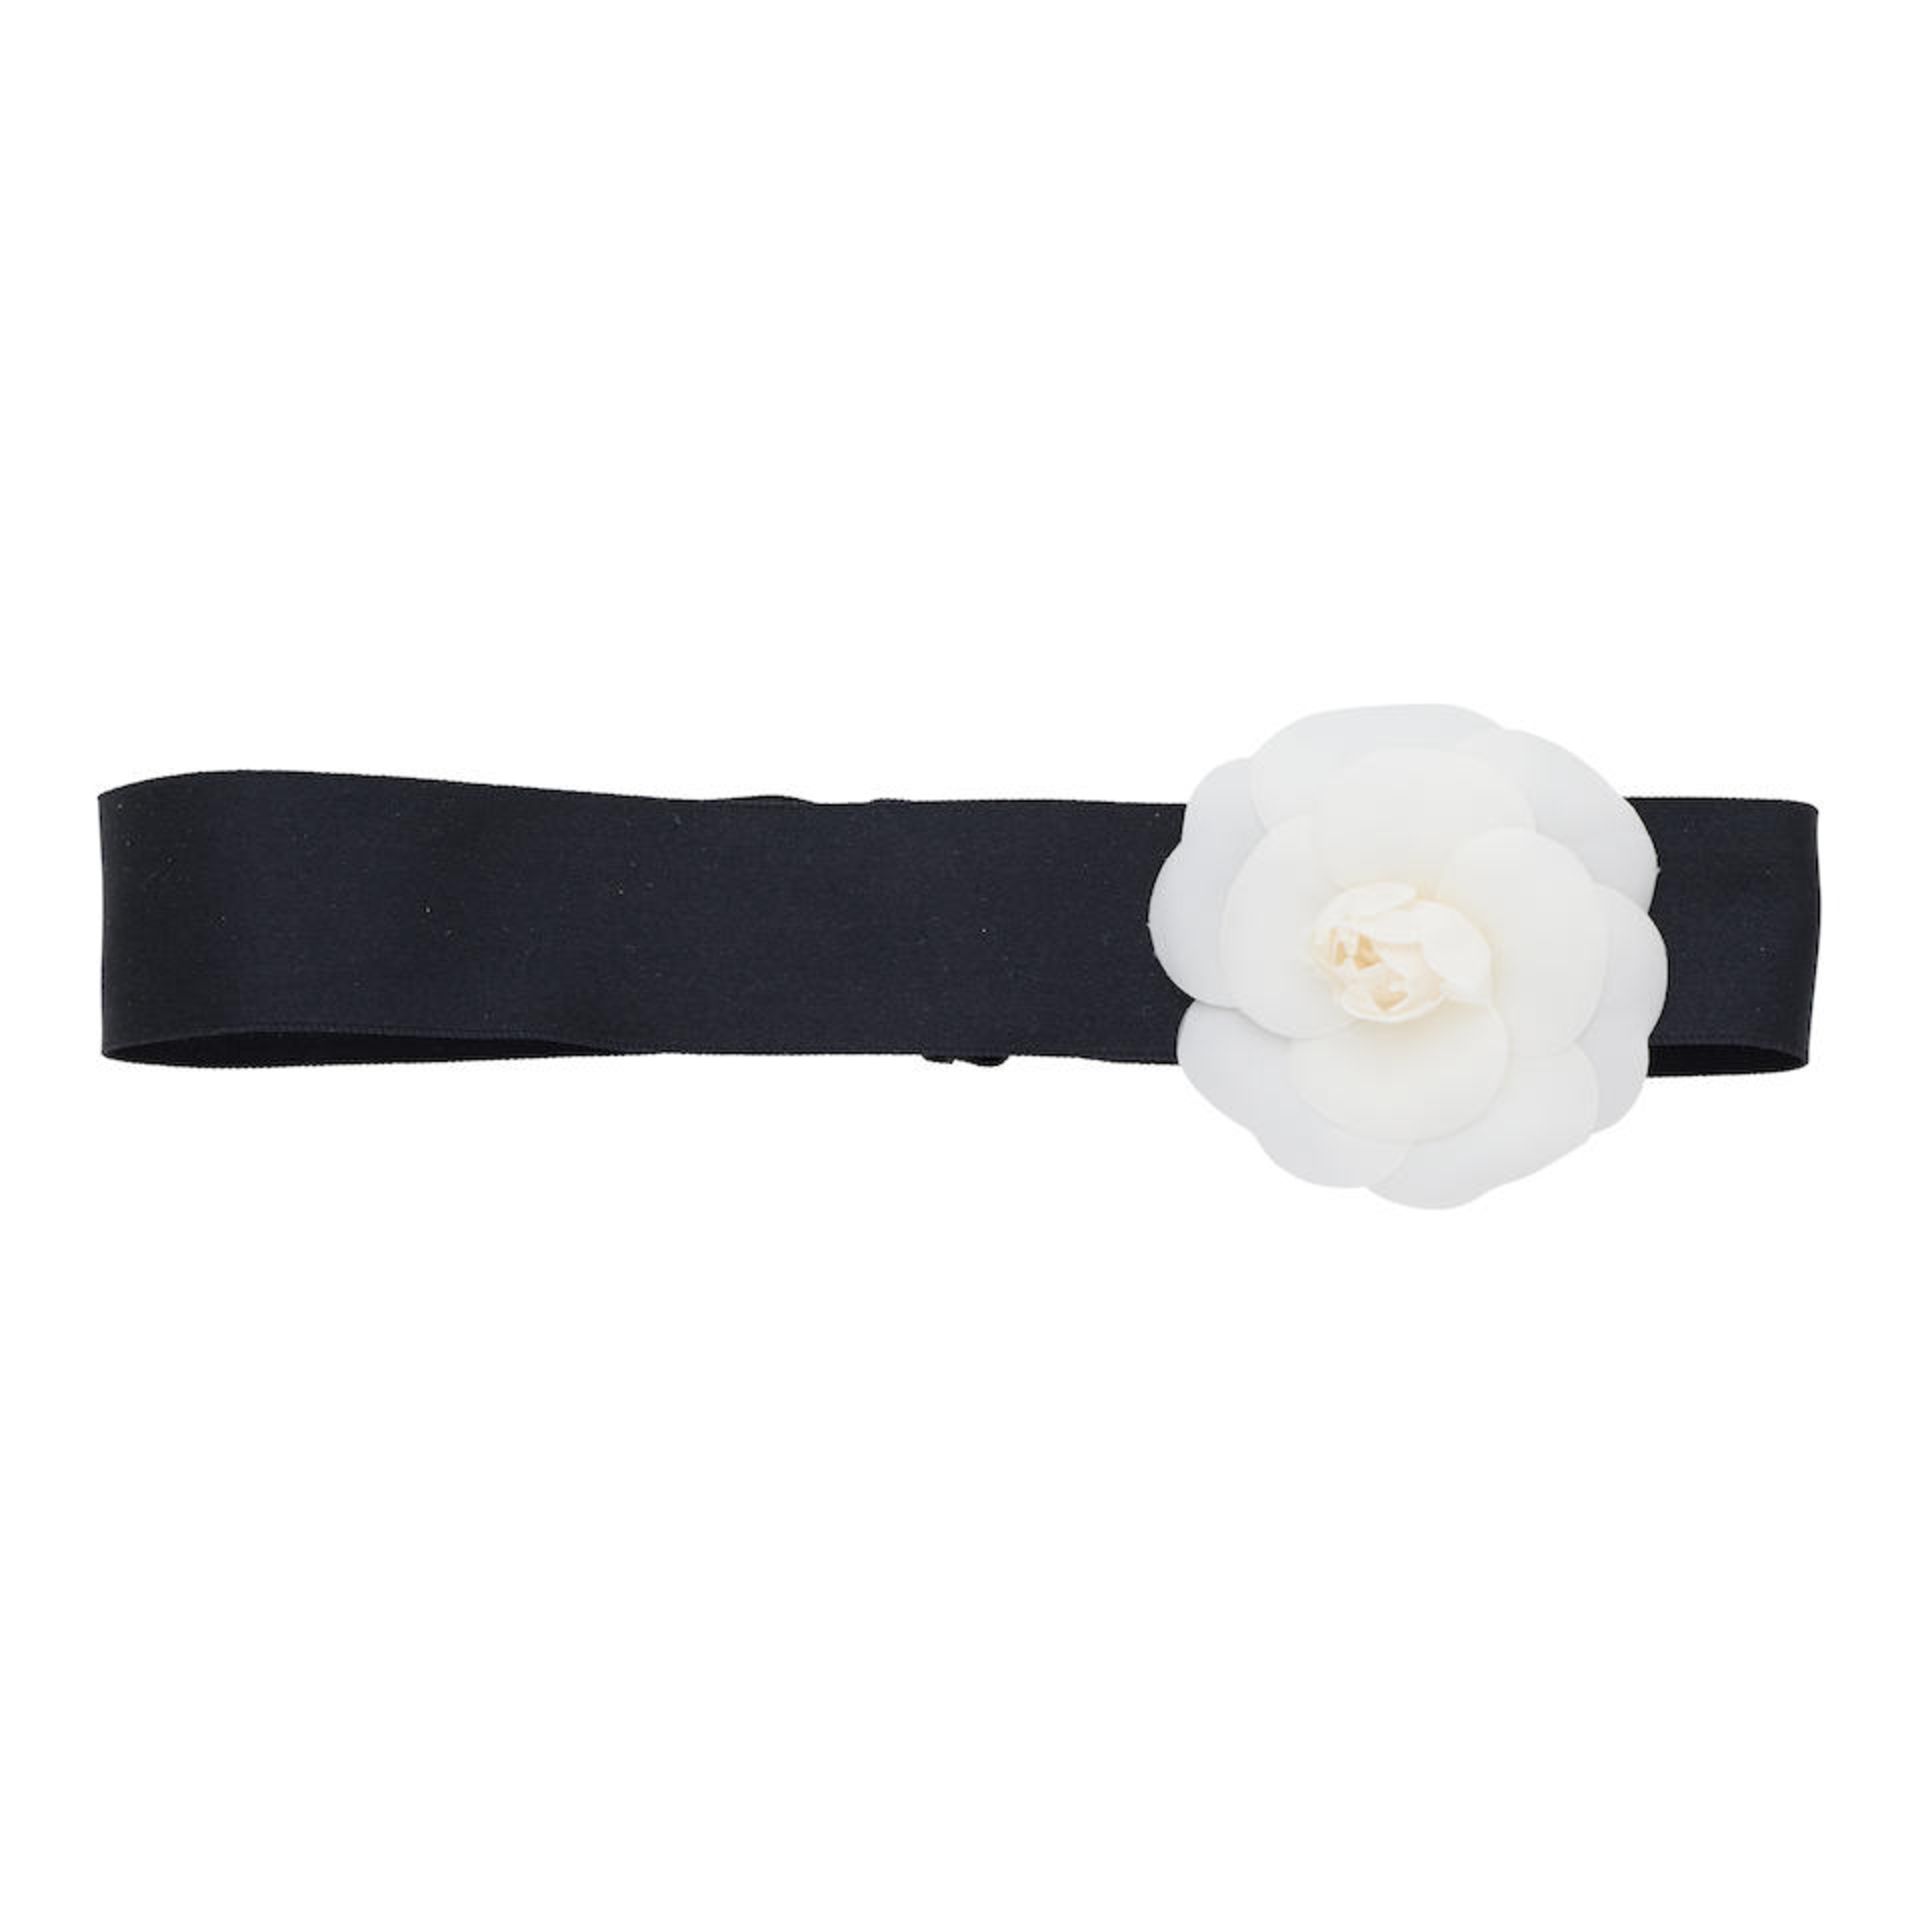 Karl Lagerfeld for Chanel: a Black and White Camellia Hair Band 1990s (includes box) - Image 2 of 2